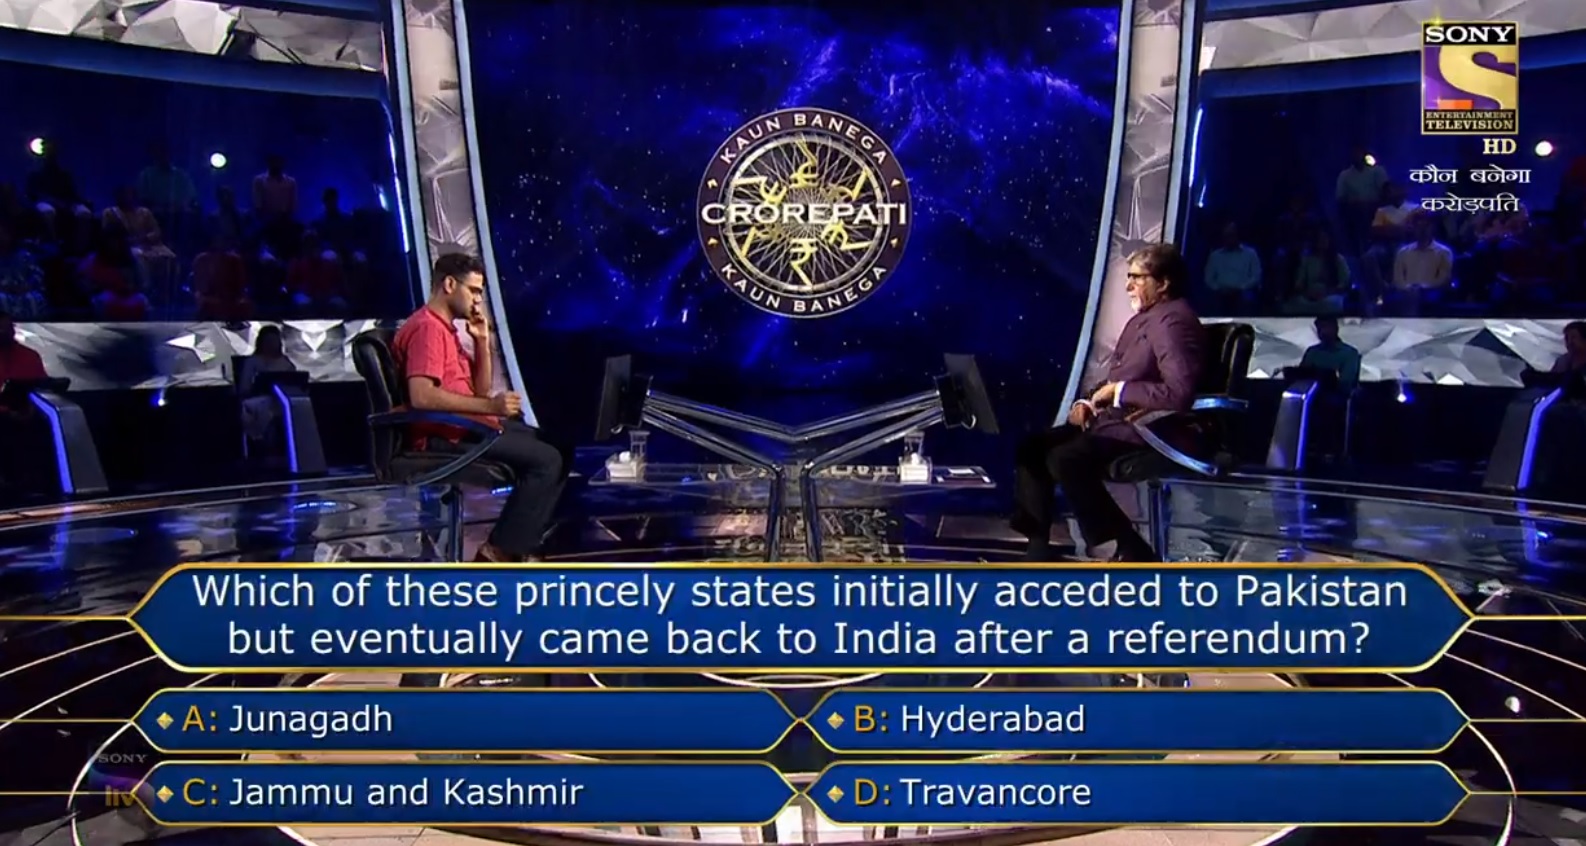 Ques : Which of these princely states initially acceded to Pakistan but eventually came back to India after a referendum?